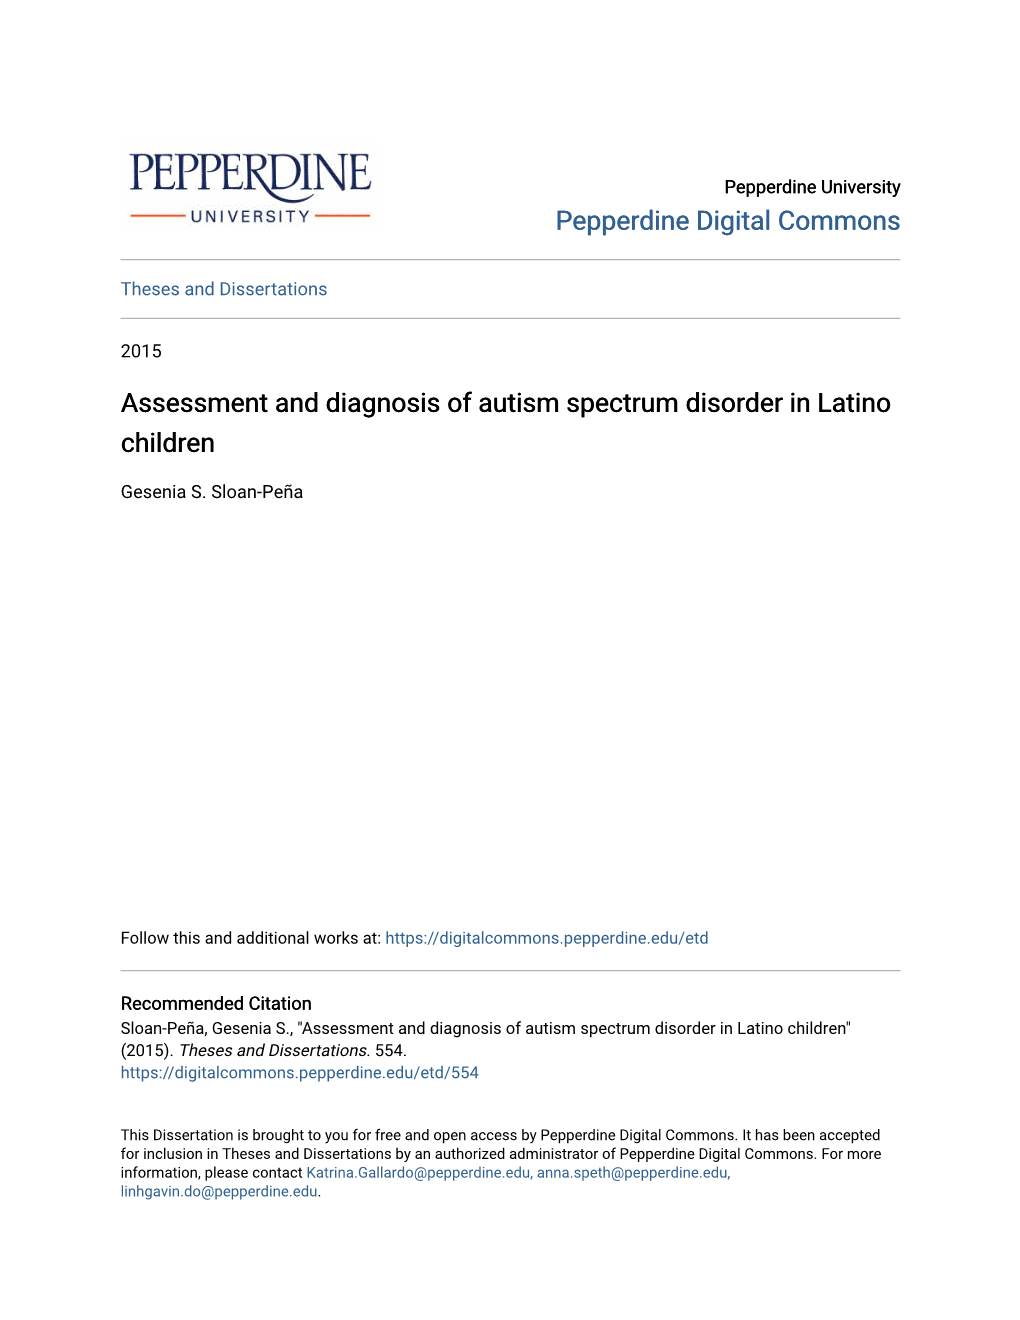 Assessment and Diagnosis of Autism Spectrum Disorder in Latino Children